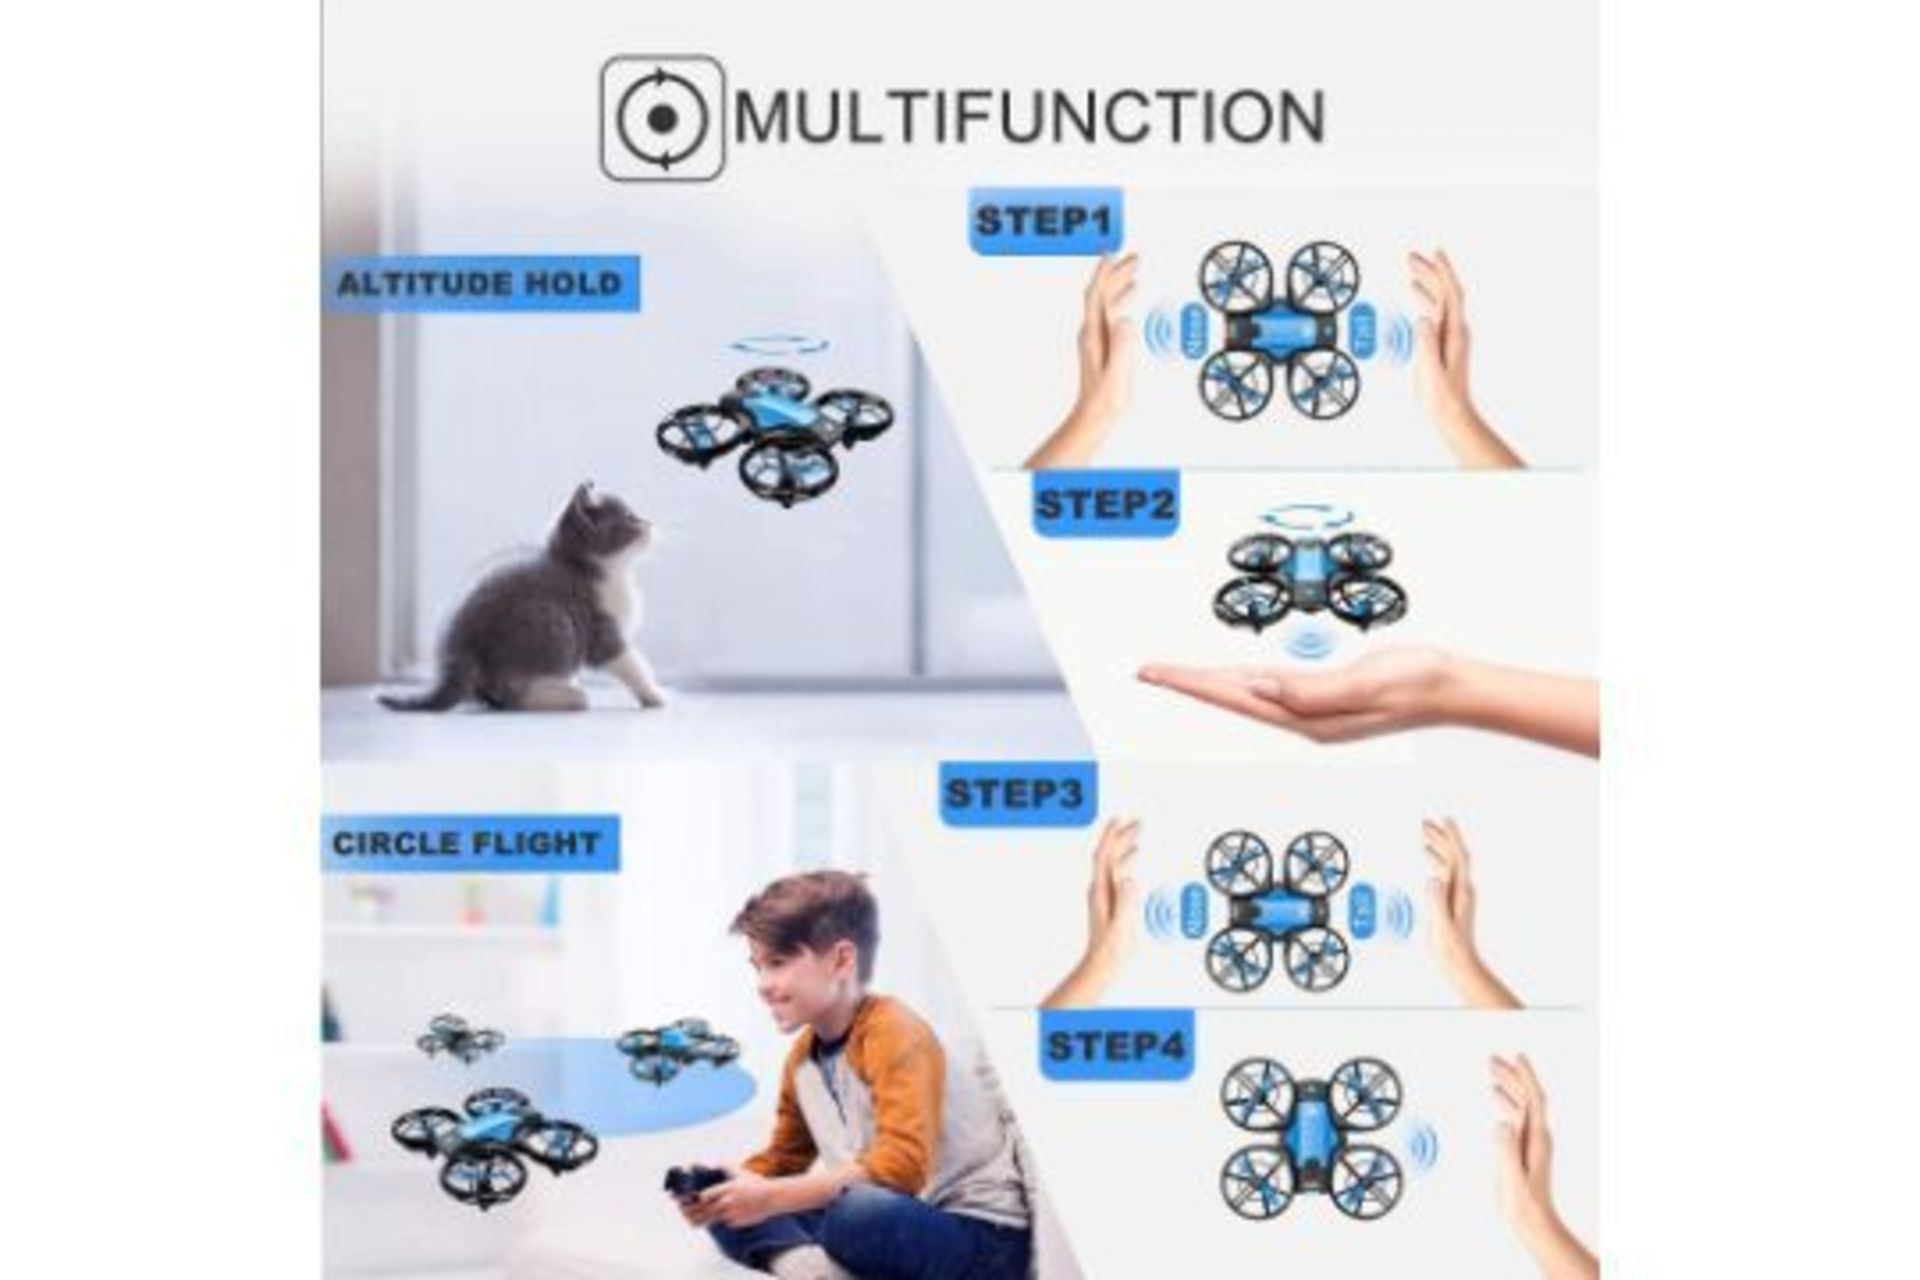 2 X 4DRC Mini Drone for Kids Hand Operated RC Quadcopter Longer Flight Time, (4DV8) Altitude Hold, - Image 3 of 3